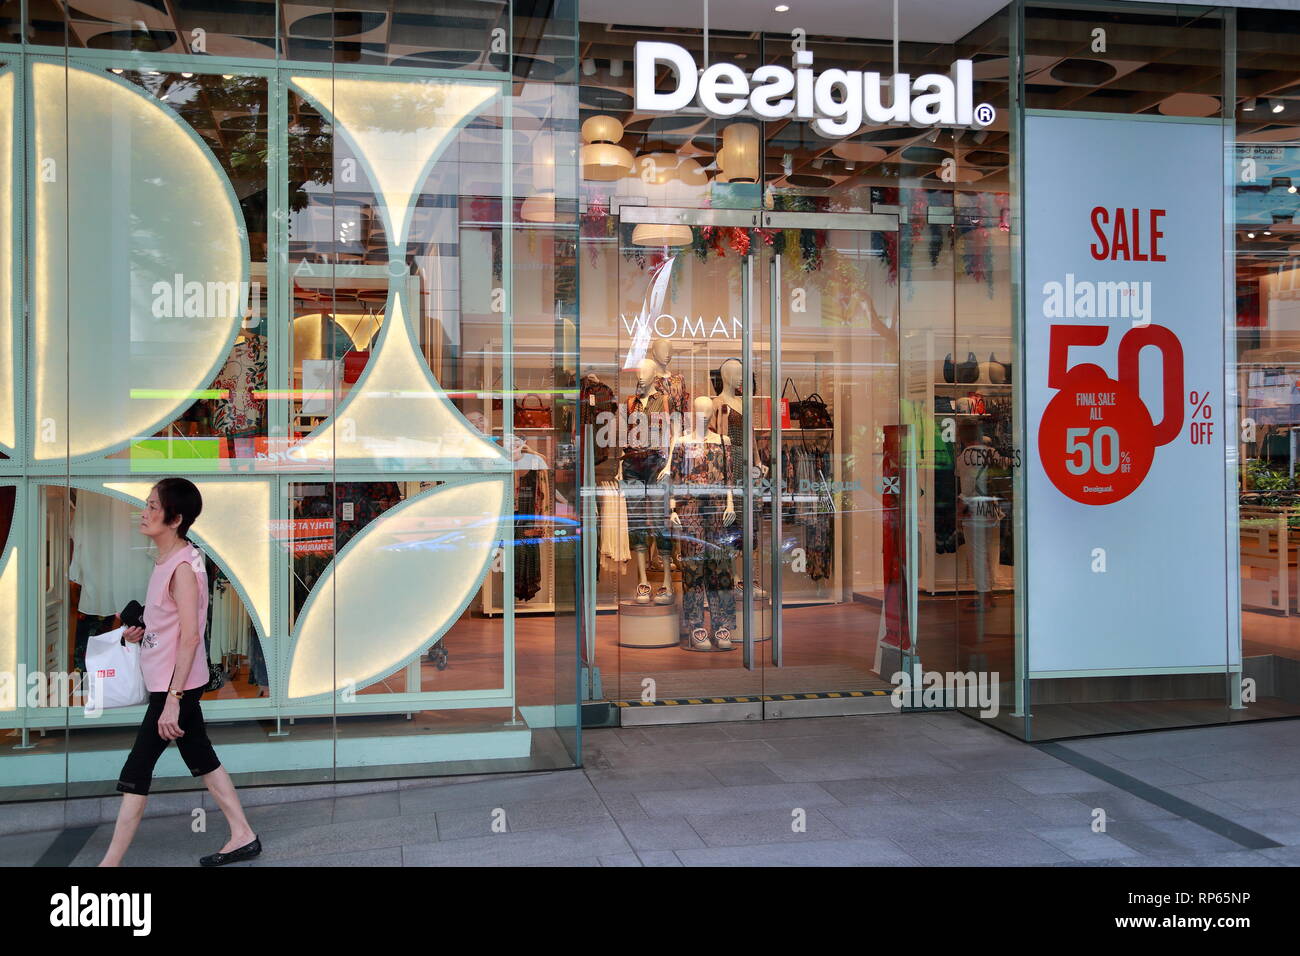 Desigual store in downtown Singapore Stock Photo - Alamy